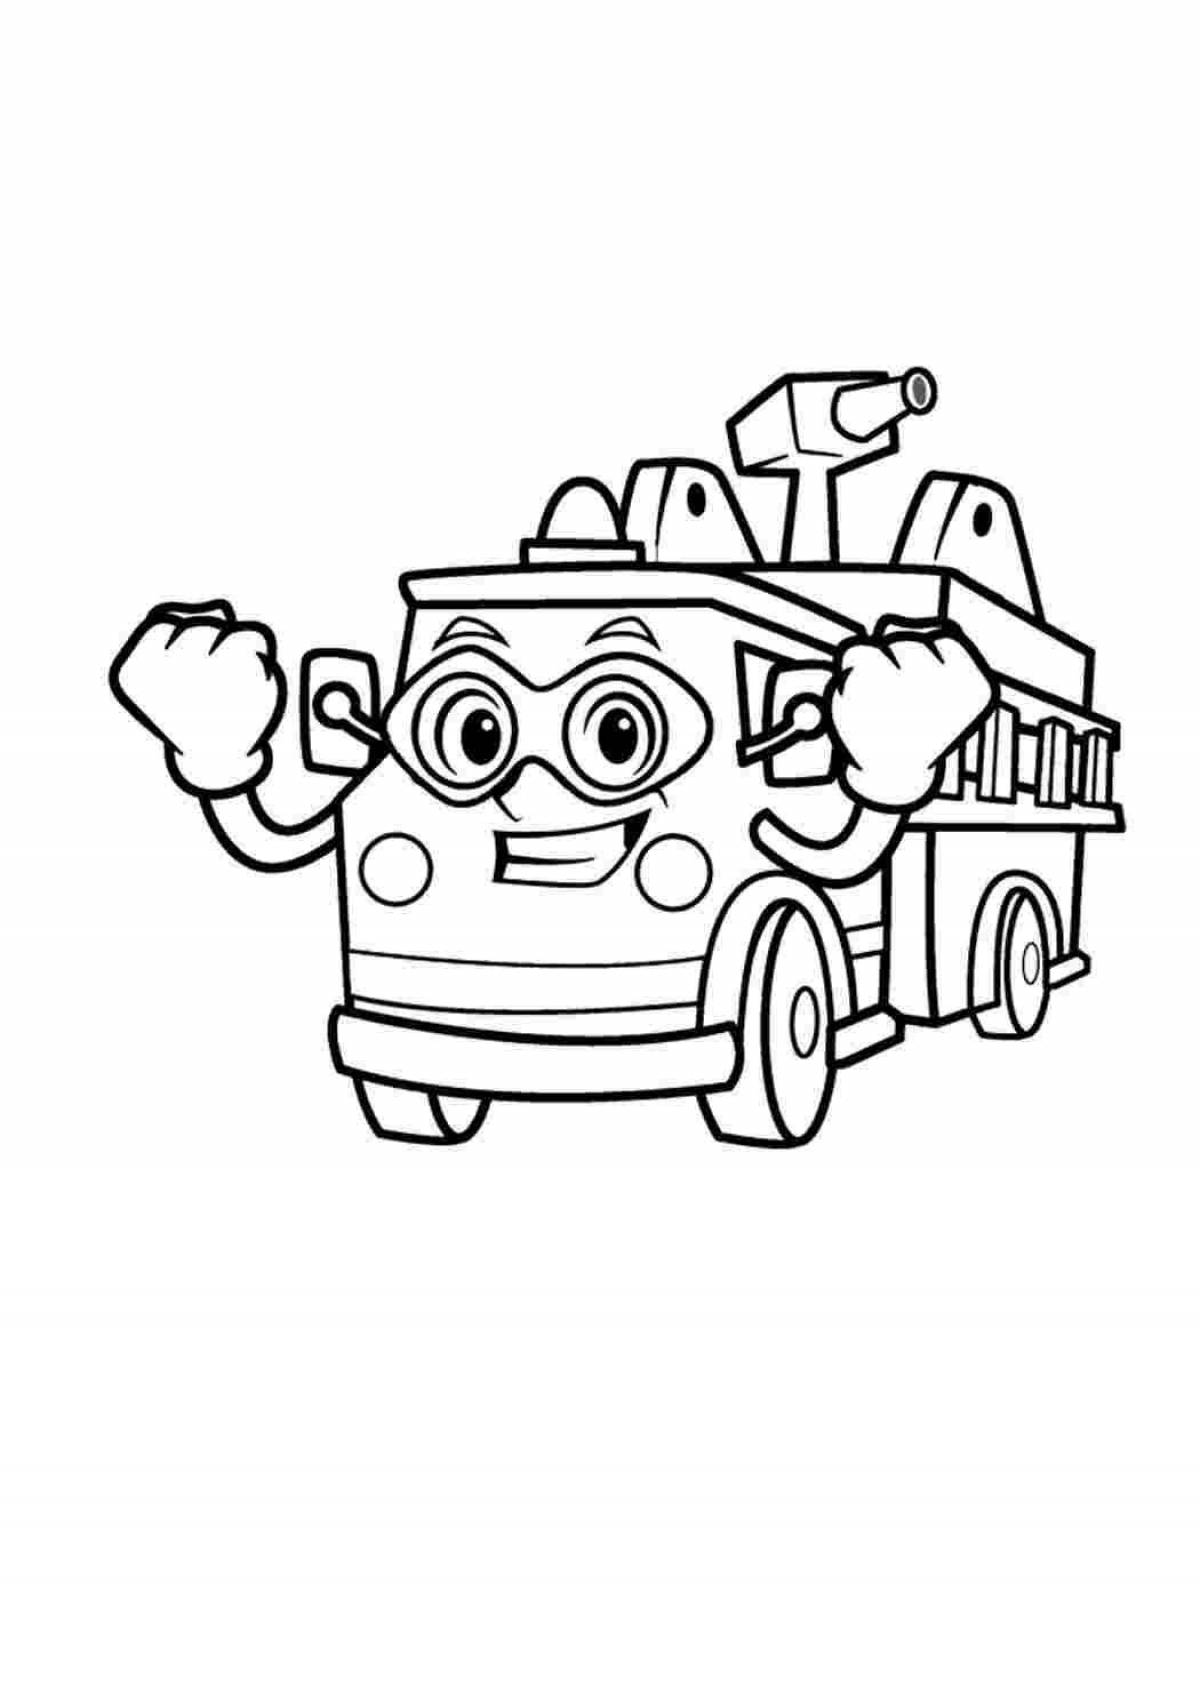 Attractive finley fire truck coloring page